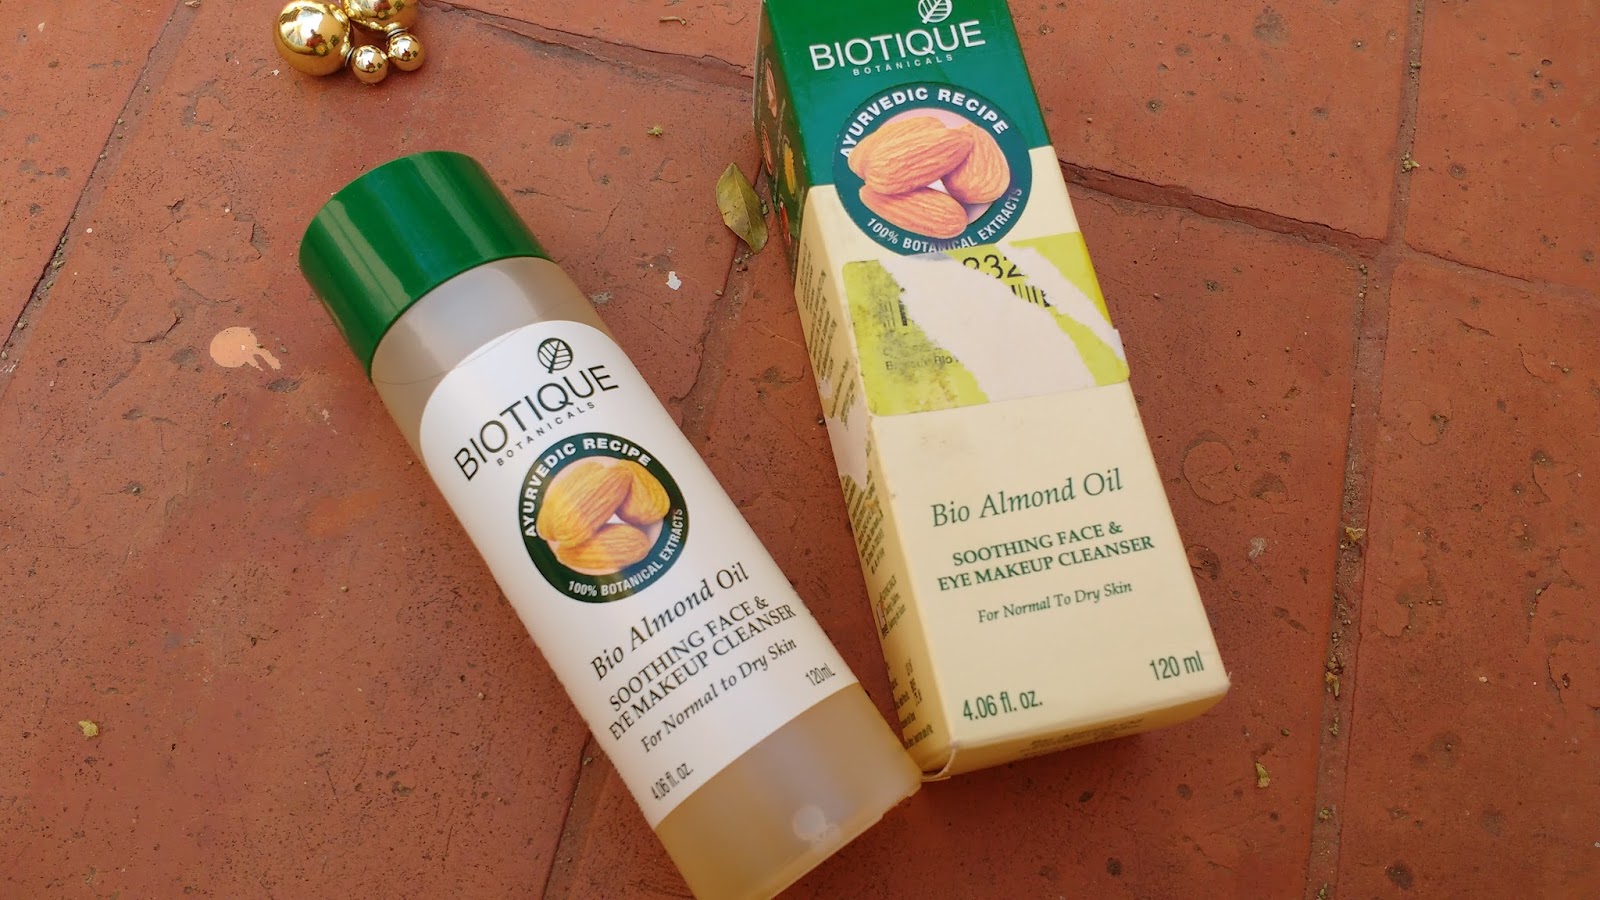 Biotique Bio Almond Oil Soothing Face and Eye Makeup Cleanser Review || How  I Double Cleanse | Bling Sparkle